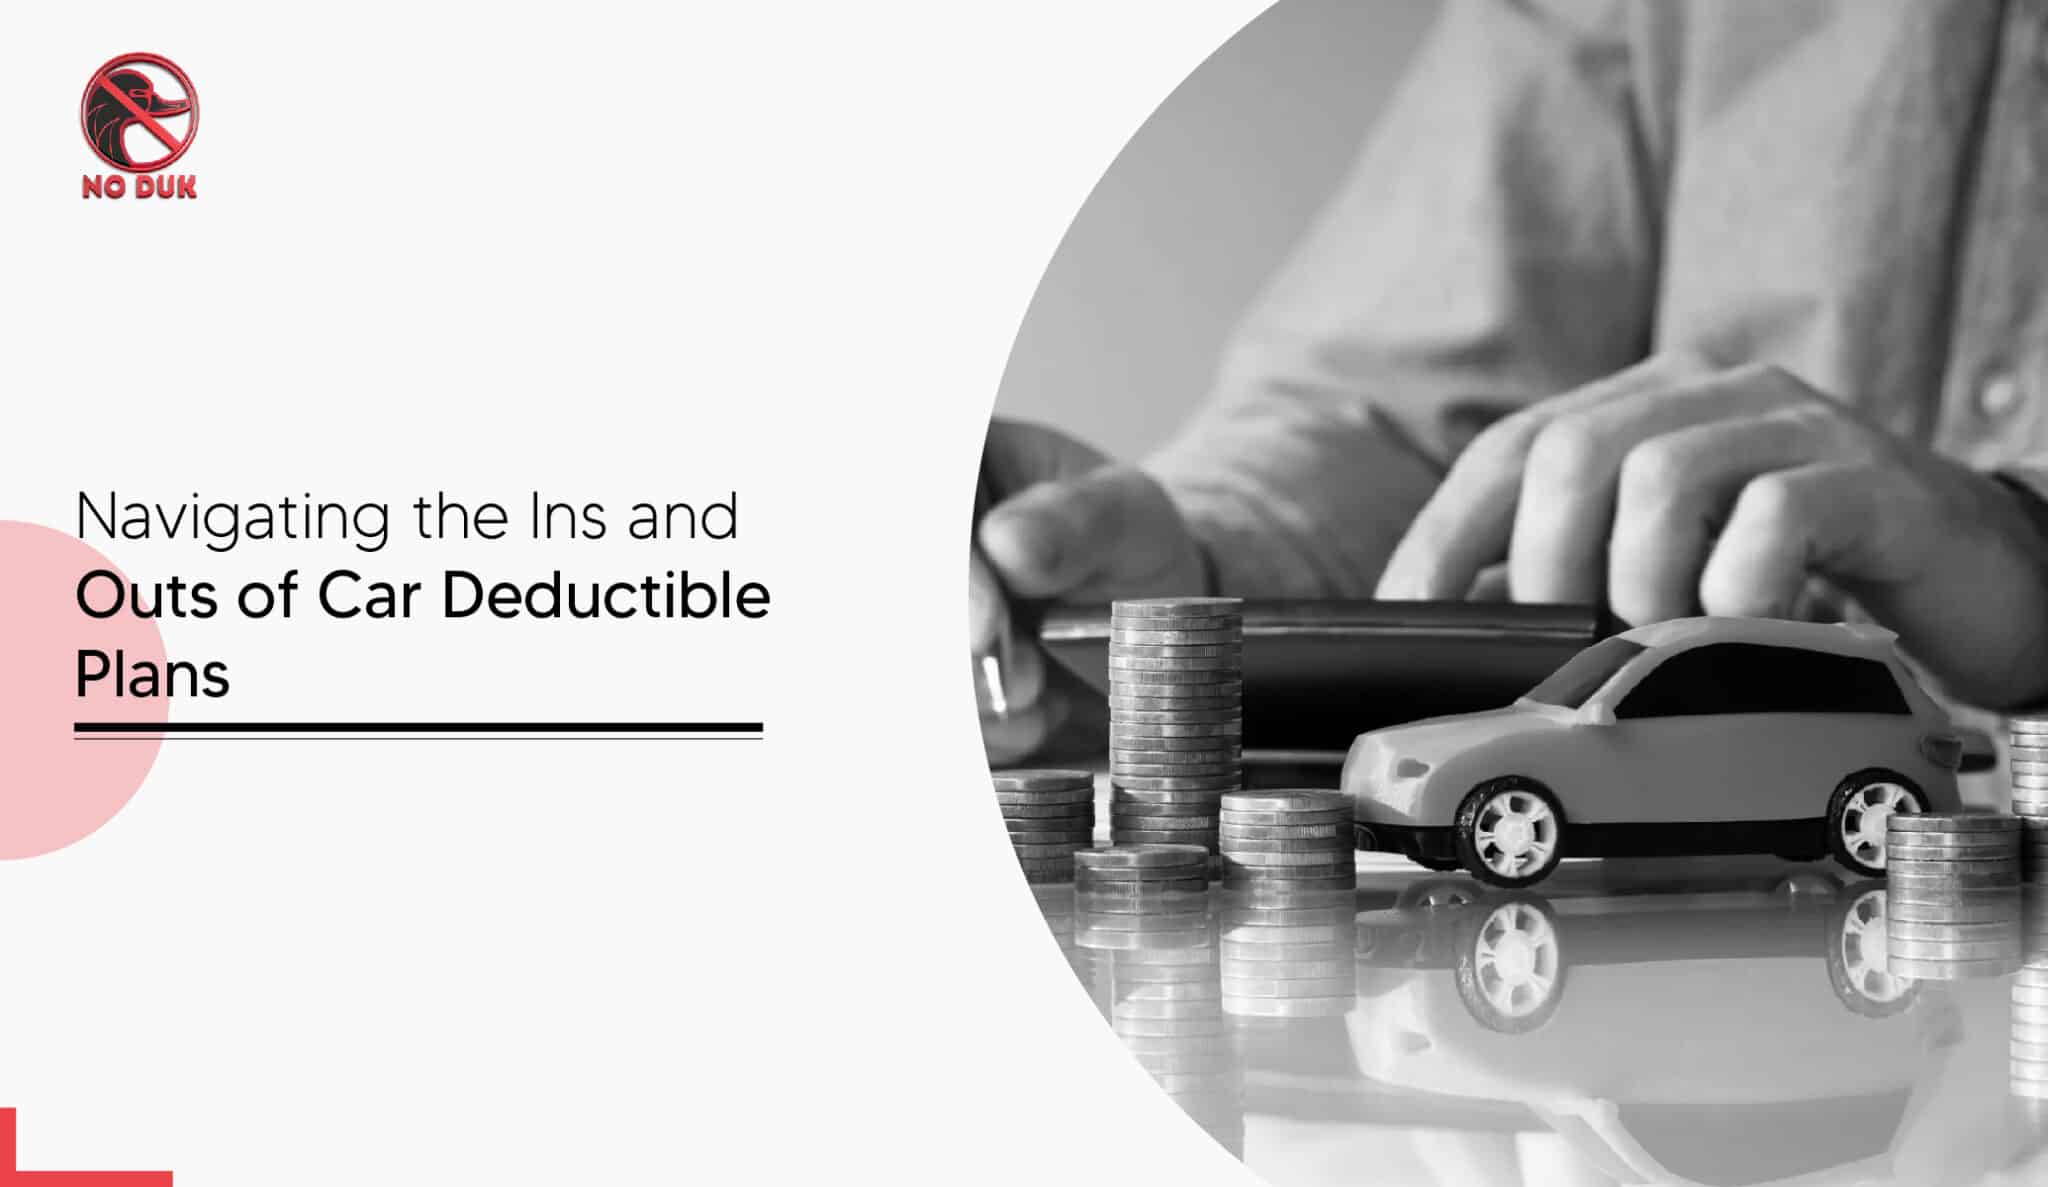 Navigating the Ins and Outs of Car Deductible Plans